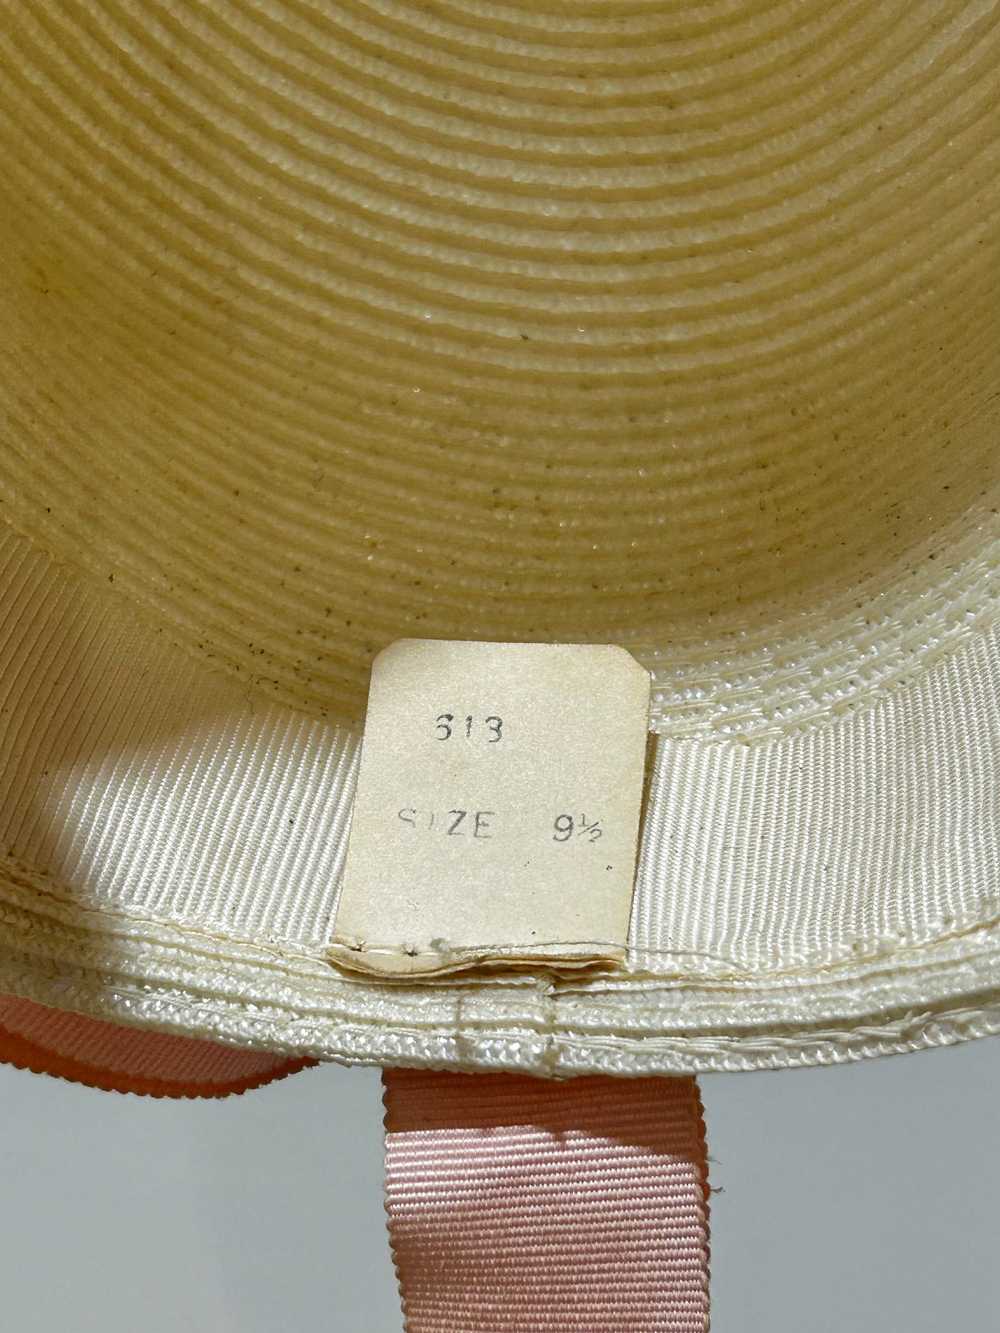 Vintage Sun Hat with Pink Ribbon and Flowers - image 11